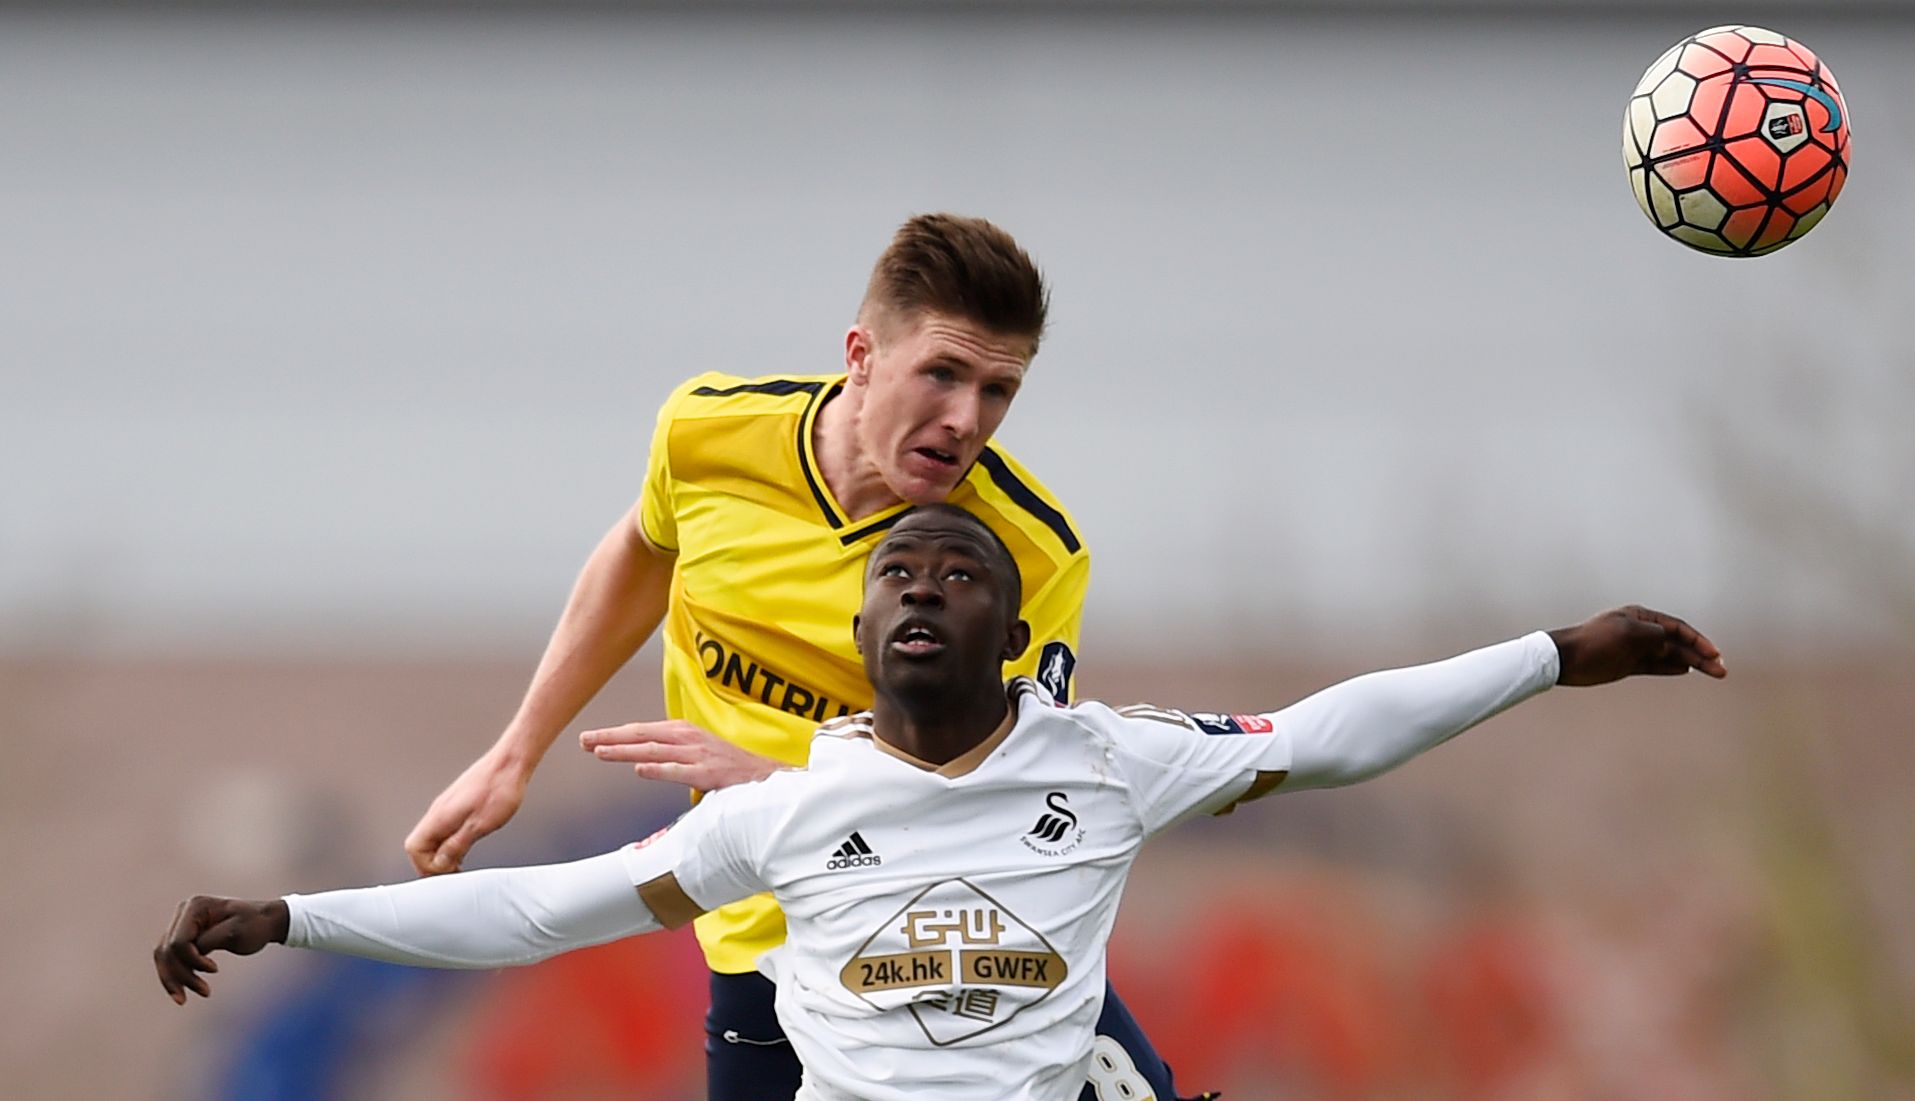 Football Soccer - Oxford United v Swansea City - FA Cup Third Round - Kassam Stadium - 10/1/16 
Swansea's Modou Barrow in action with Oxford United's John Lundstram 
Reuters / Dylan Martinez 
Livepic 
EDITORIAL USE ONLY. No use with unauthorized audio, video, data, fixture lists, club/league logos or 